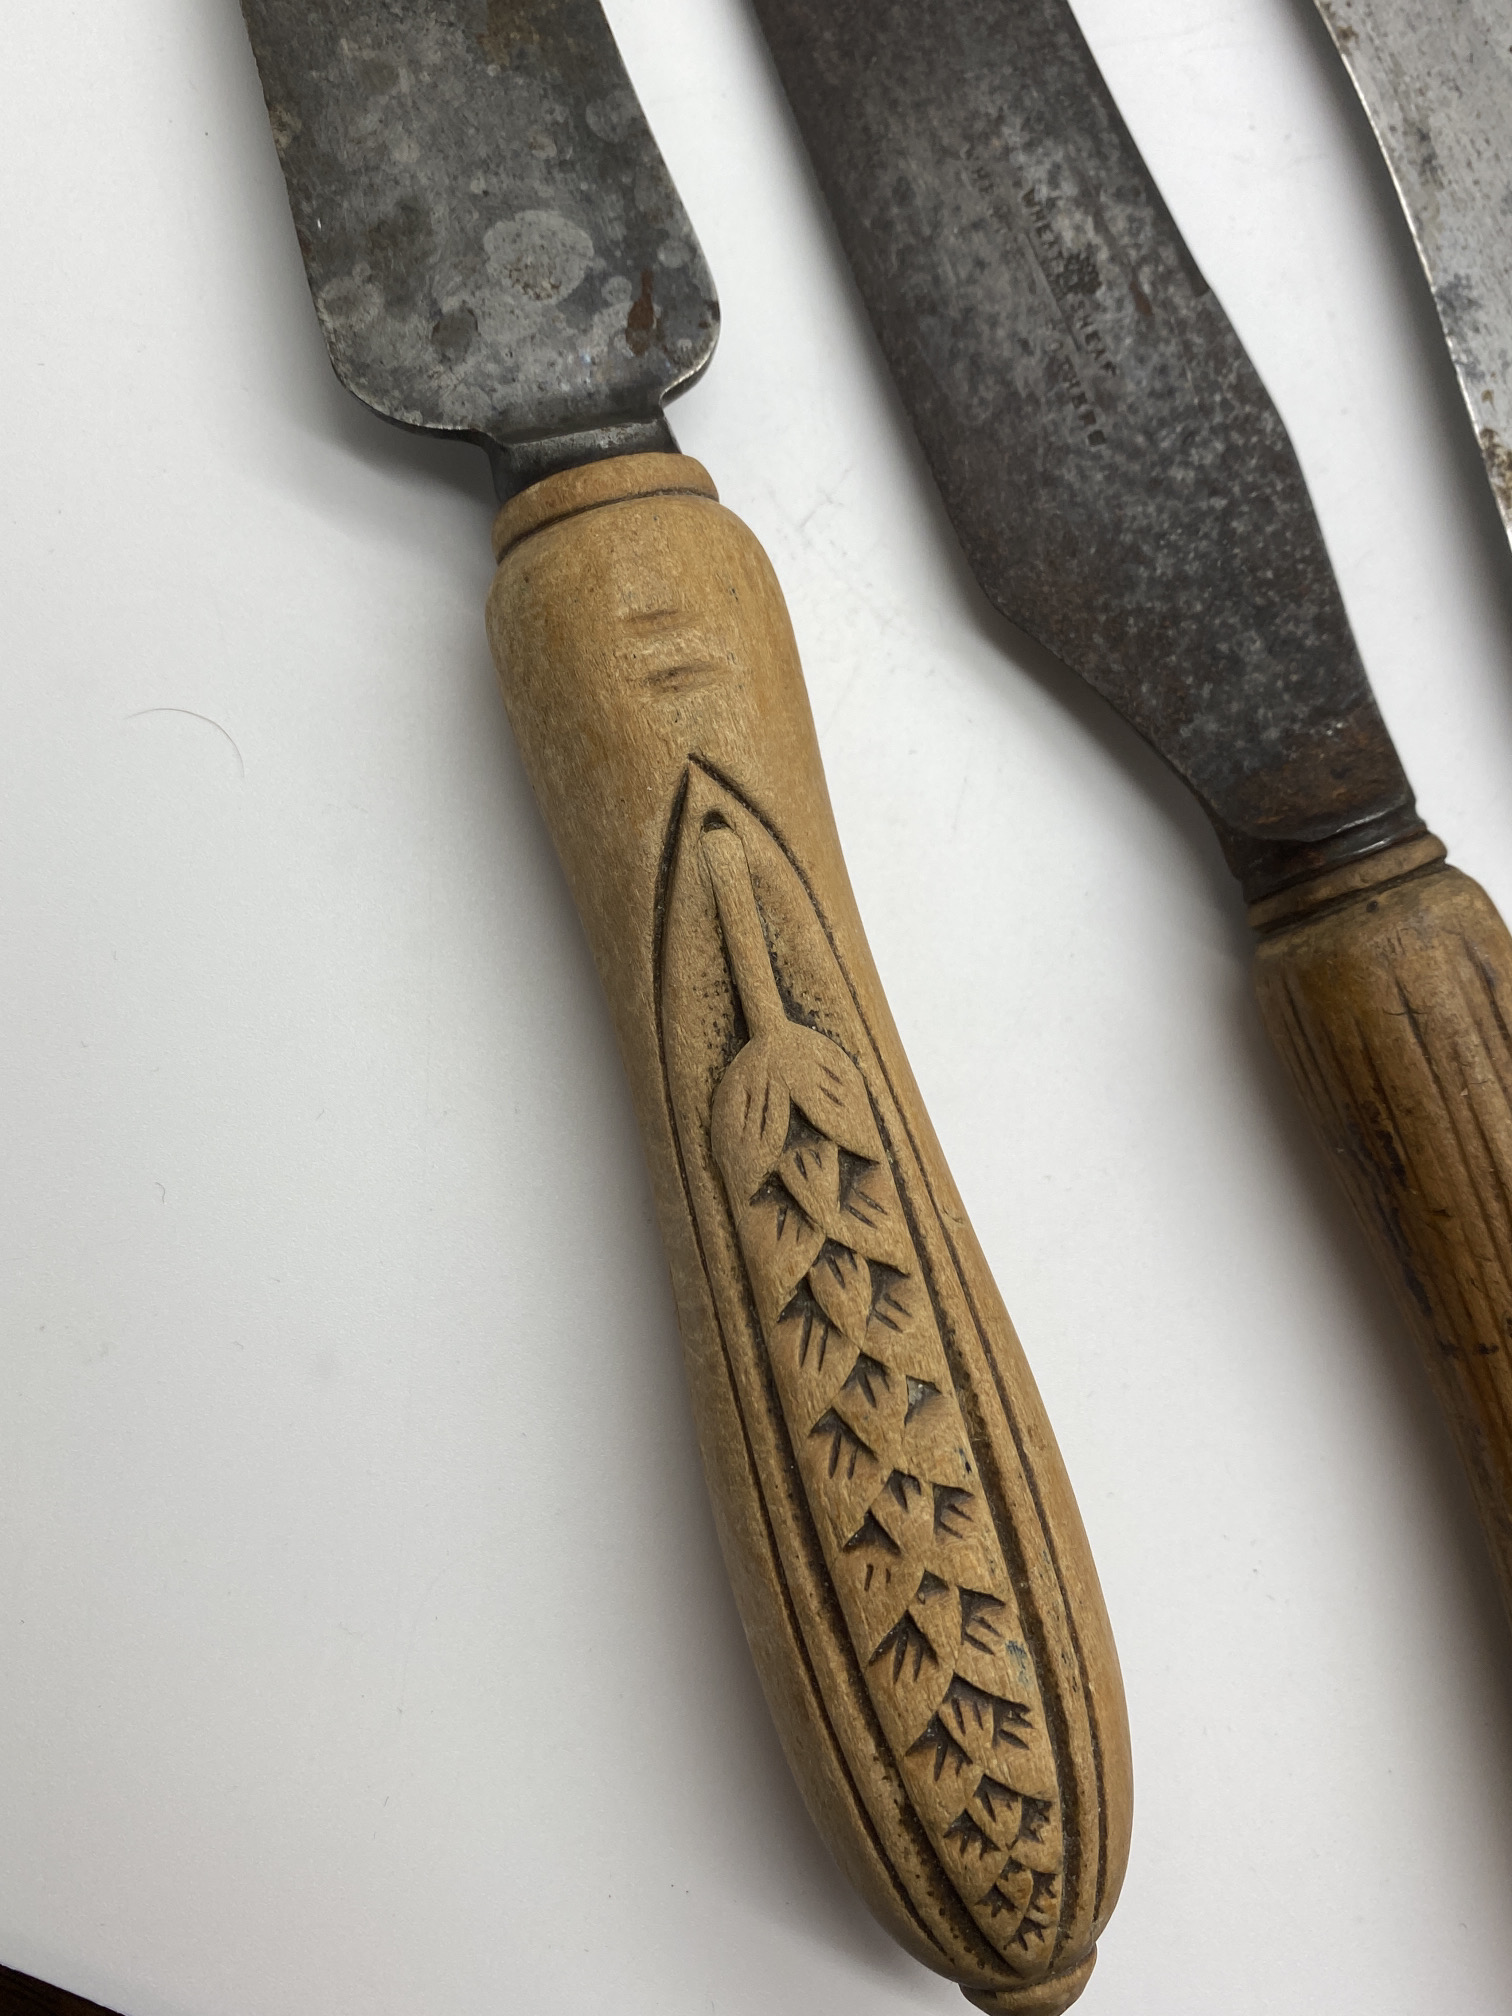 5 x ANTIQUE 1930's BREAD KNIVES INCLUDING HOVIS & BREAD - INC JOSEPH RODGERS - WHEAT SHEAF ETC - Image 12 of 14